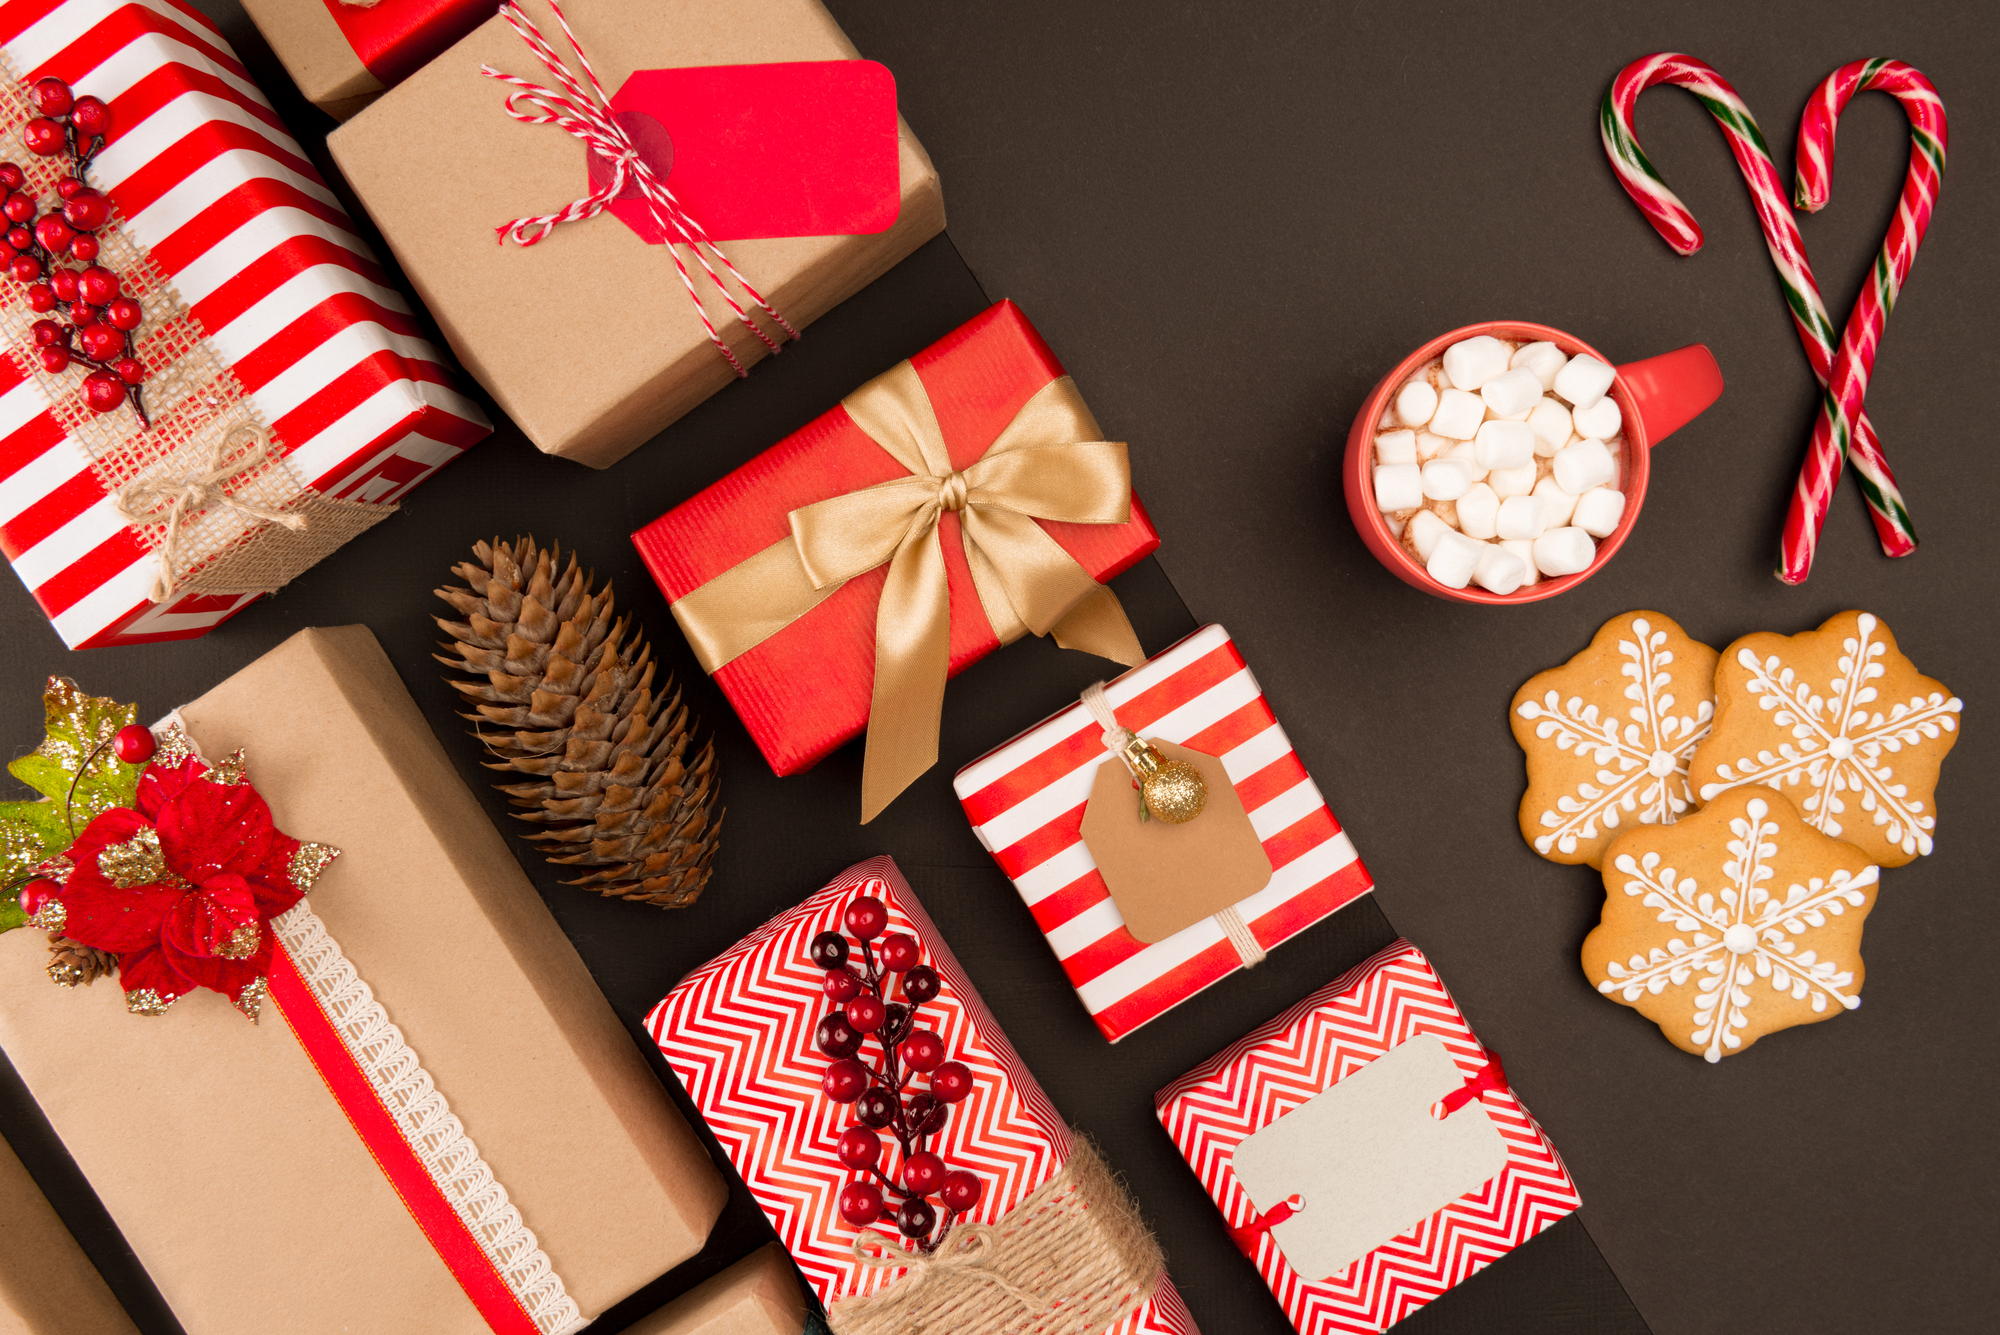 Christmas wrapped packages